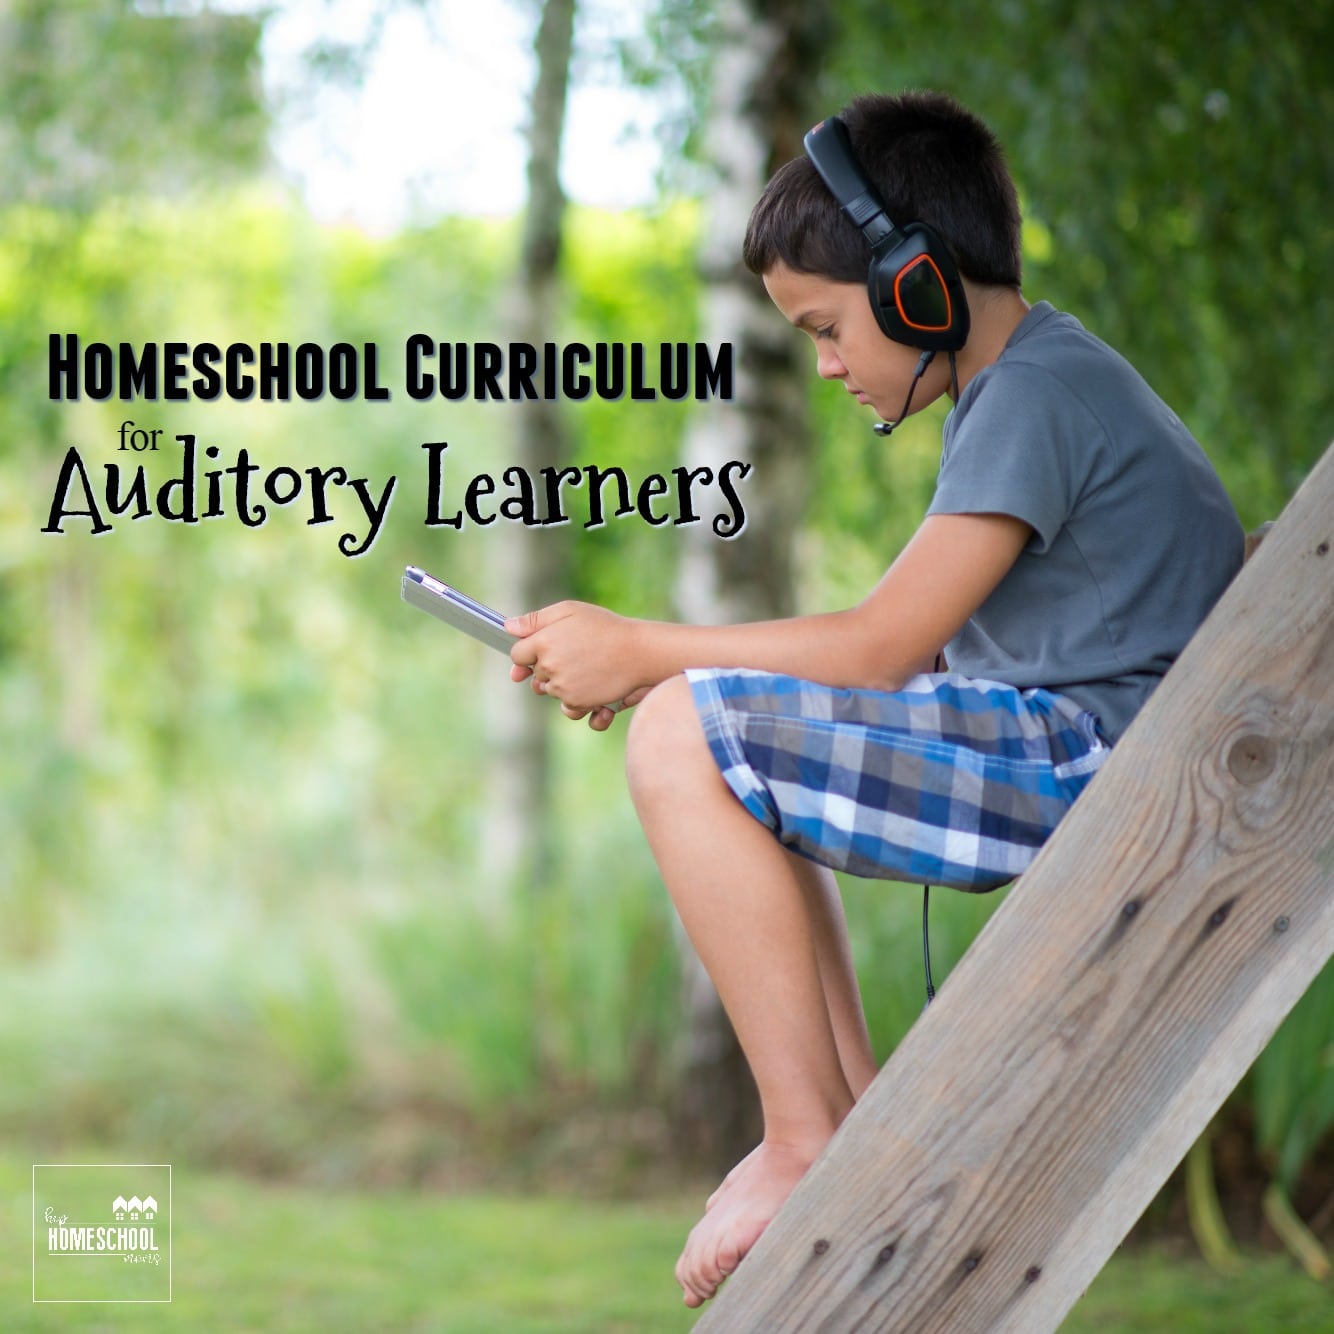 Homeschool Curriculum for Auditory Learners